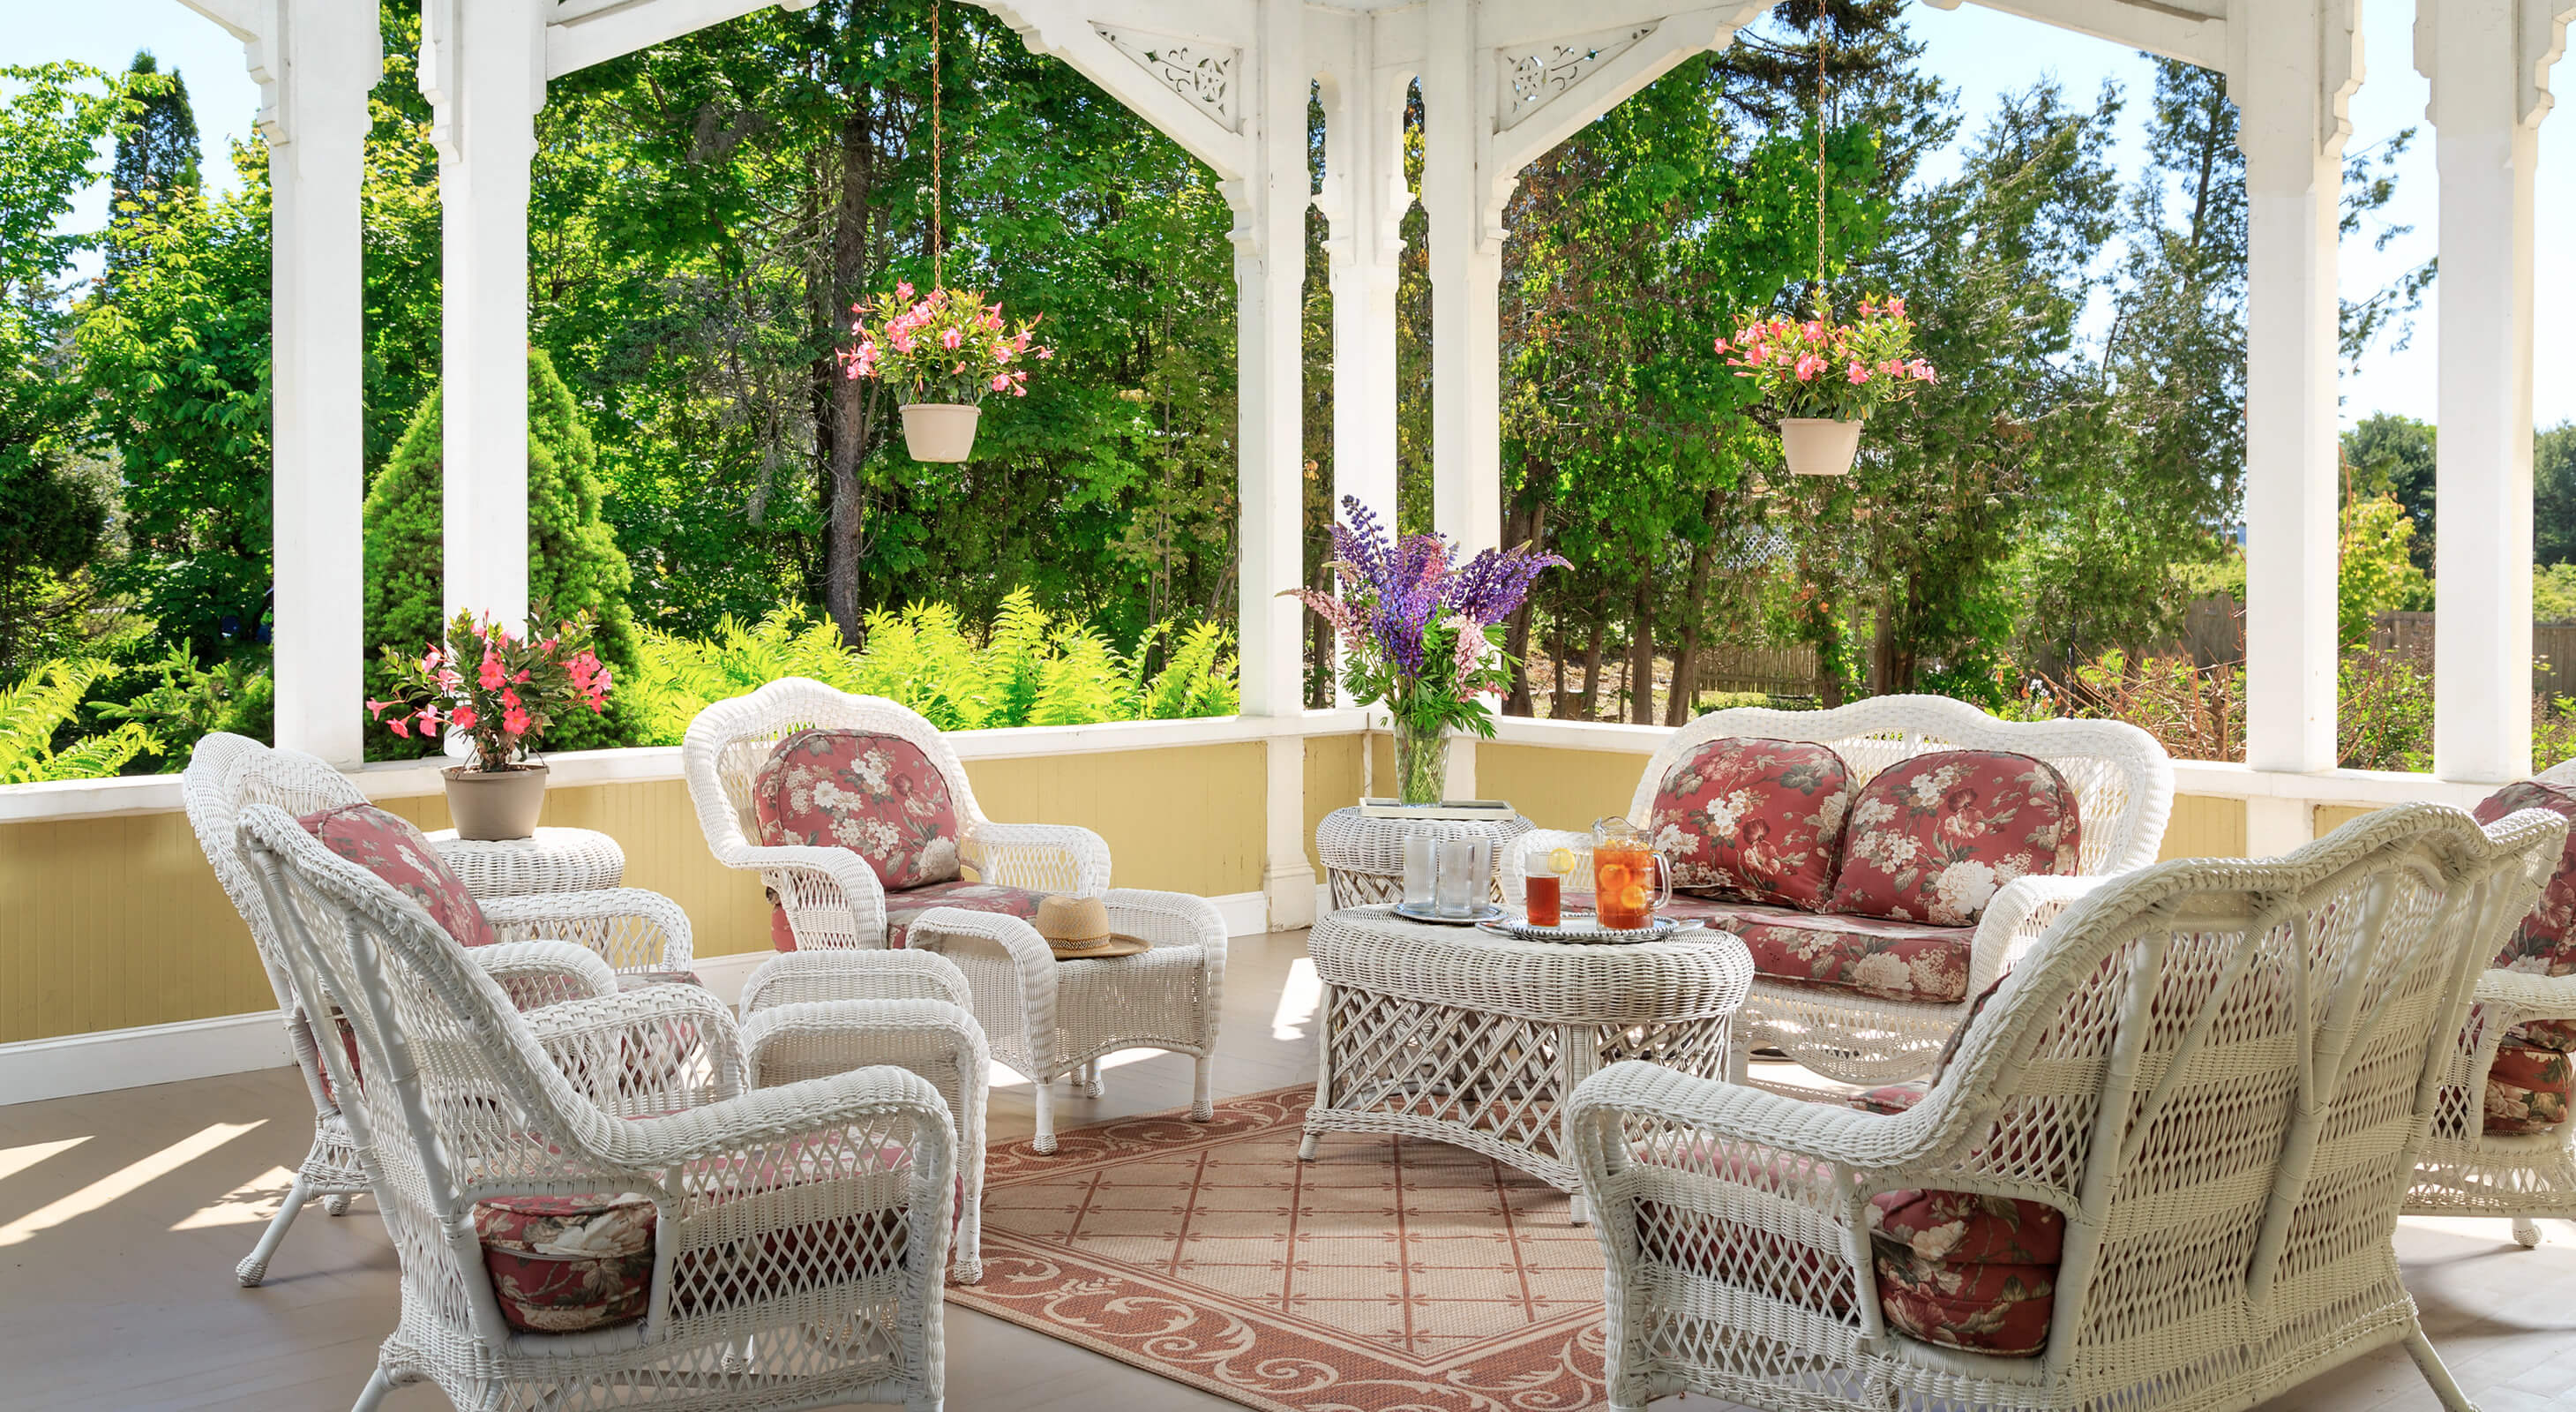 Relaxing large porch with wicker furniture